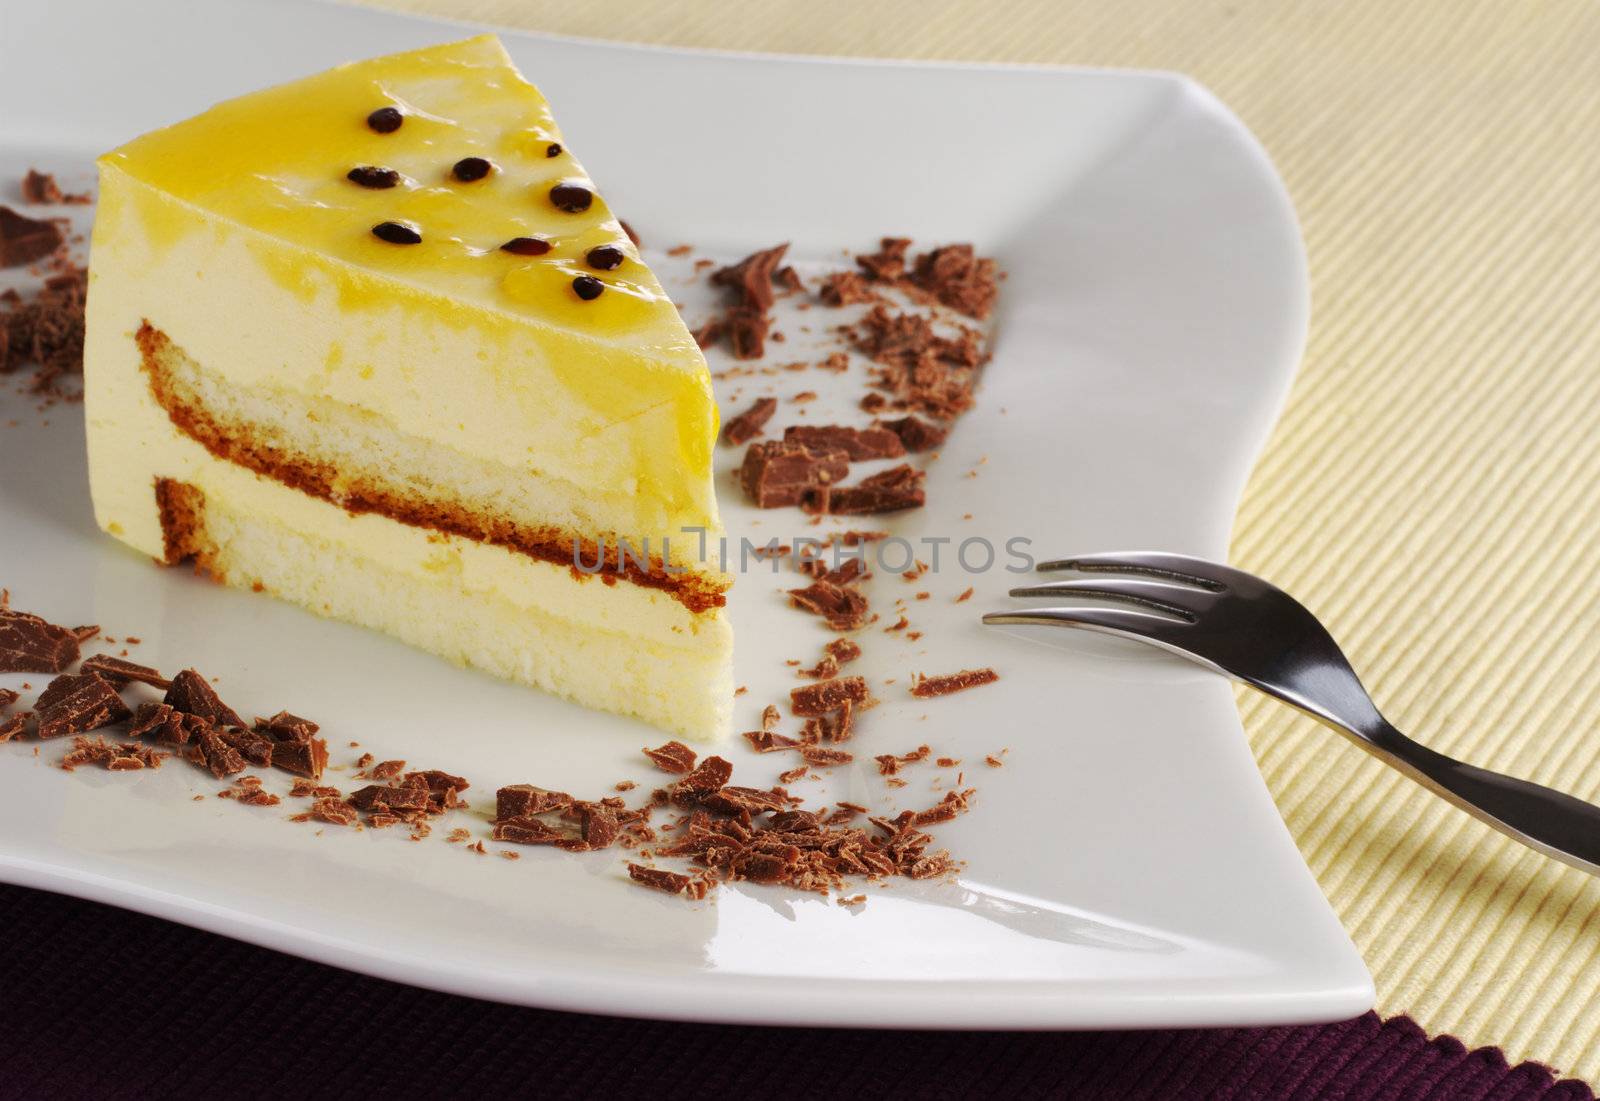 Passionfruit Cake by sven